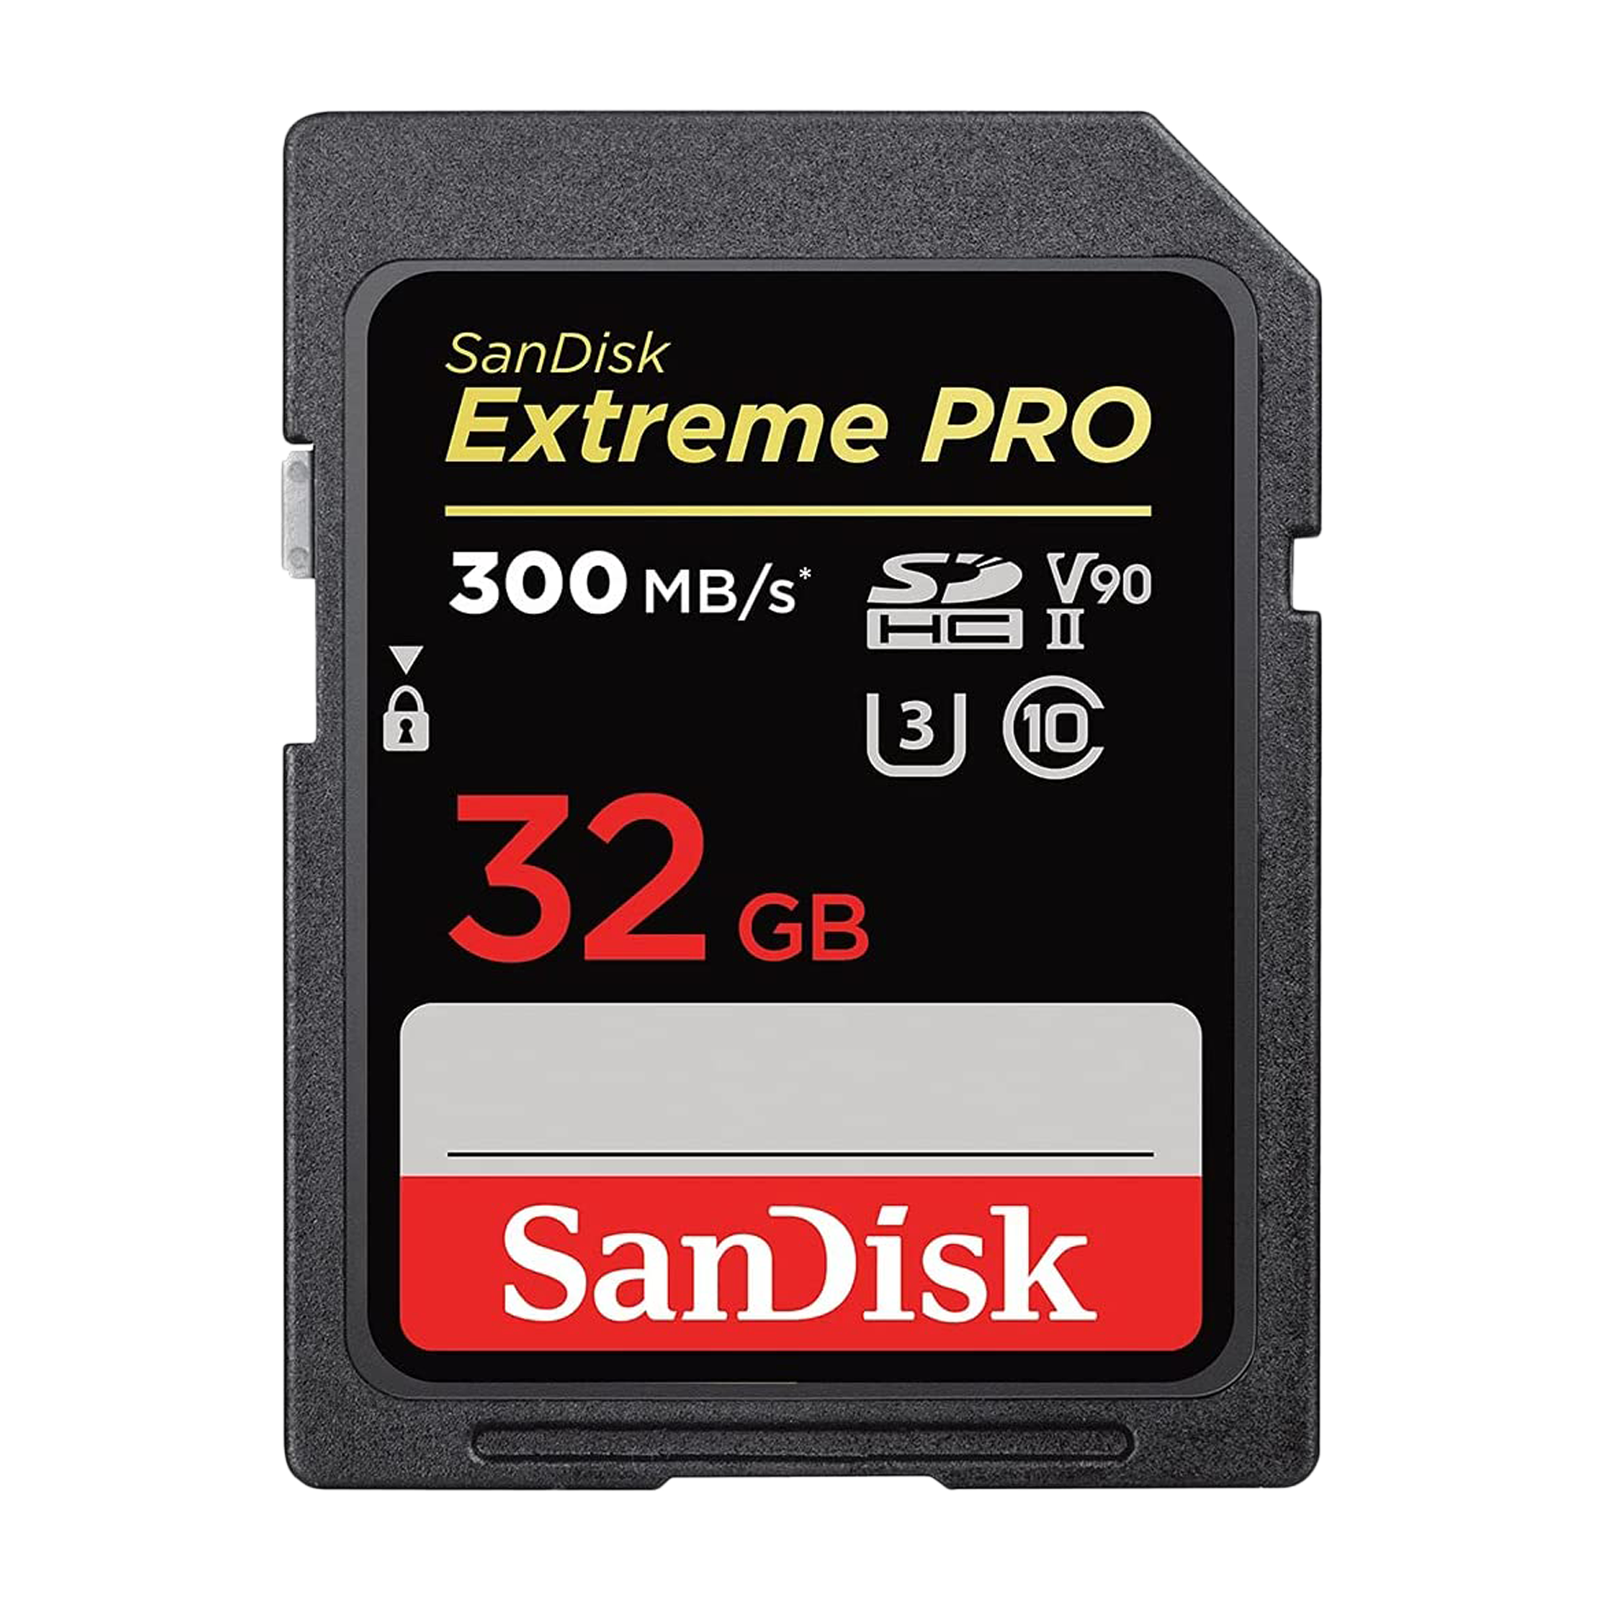 SanDisk Extreme Pro SDXC 32GB Class 10 300MB/s Memory Card